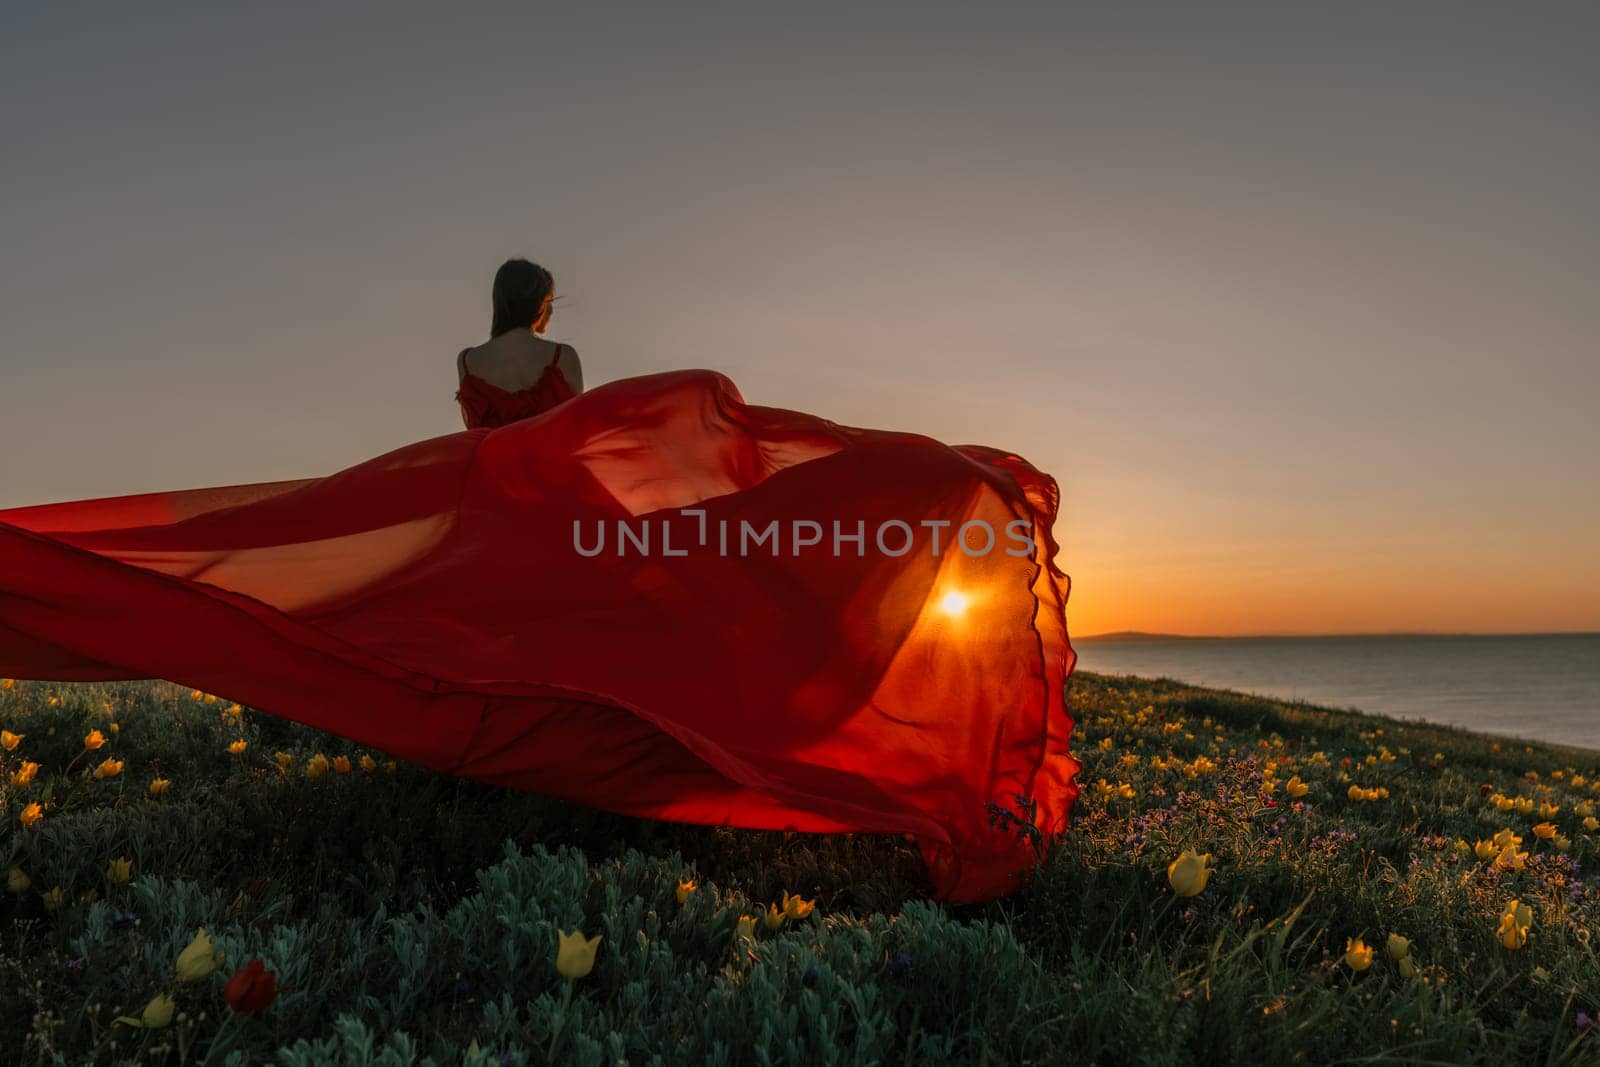 A woman in a red dress is standing in a field with the sun setting behind her. She is reaching up with her arms outstretched, as if she is trying to catch the sun. The scene is serene and peaceful